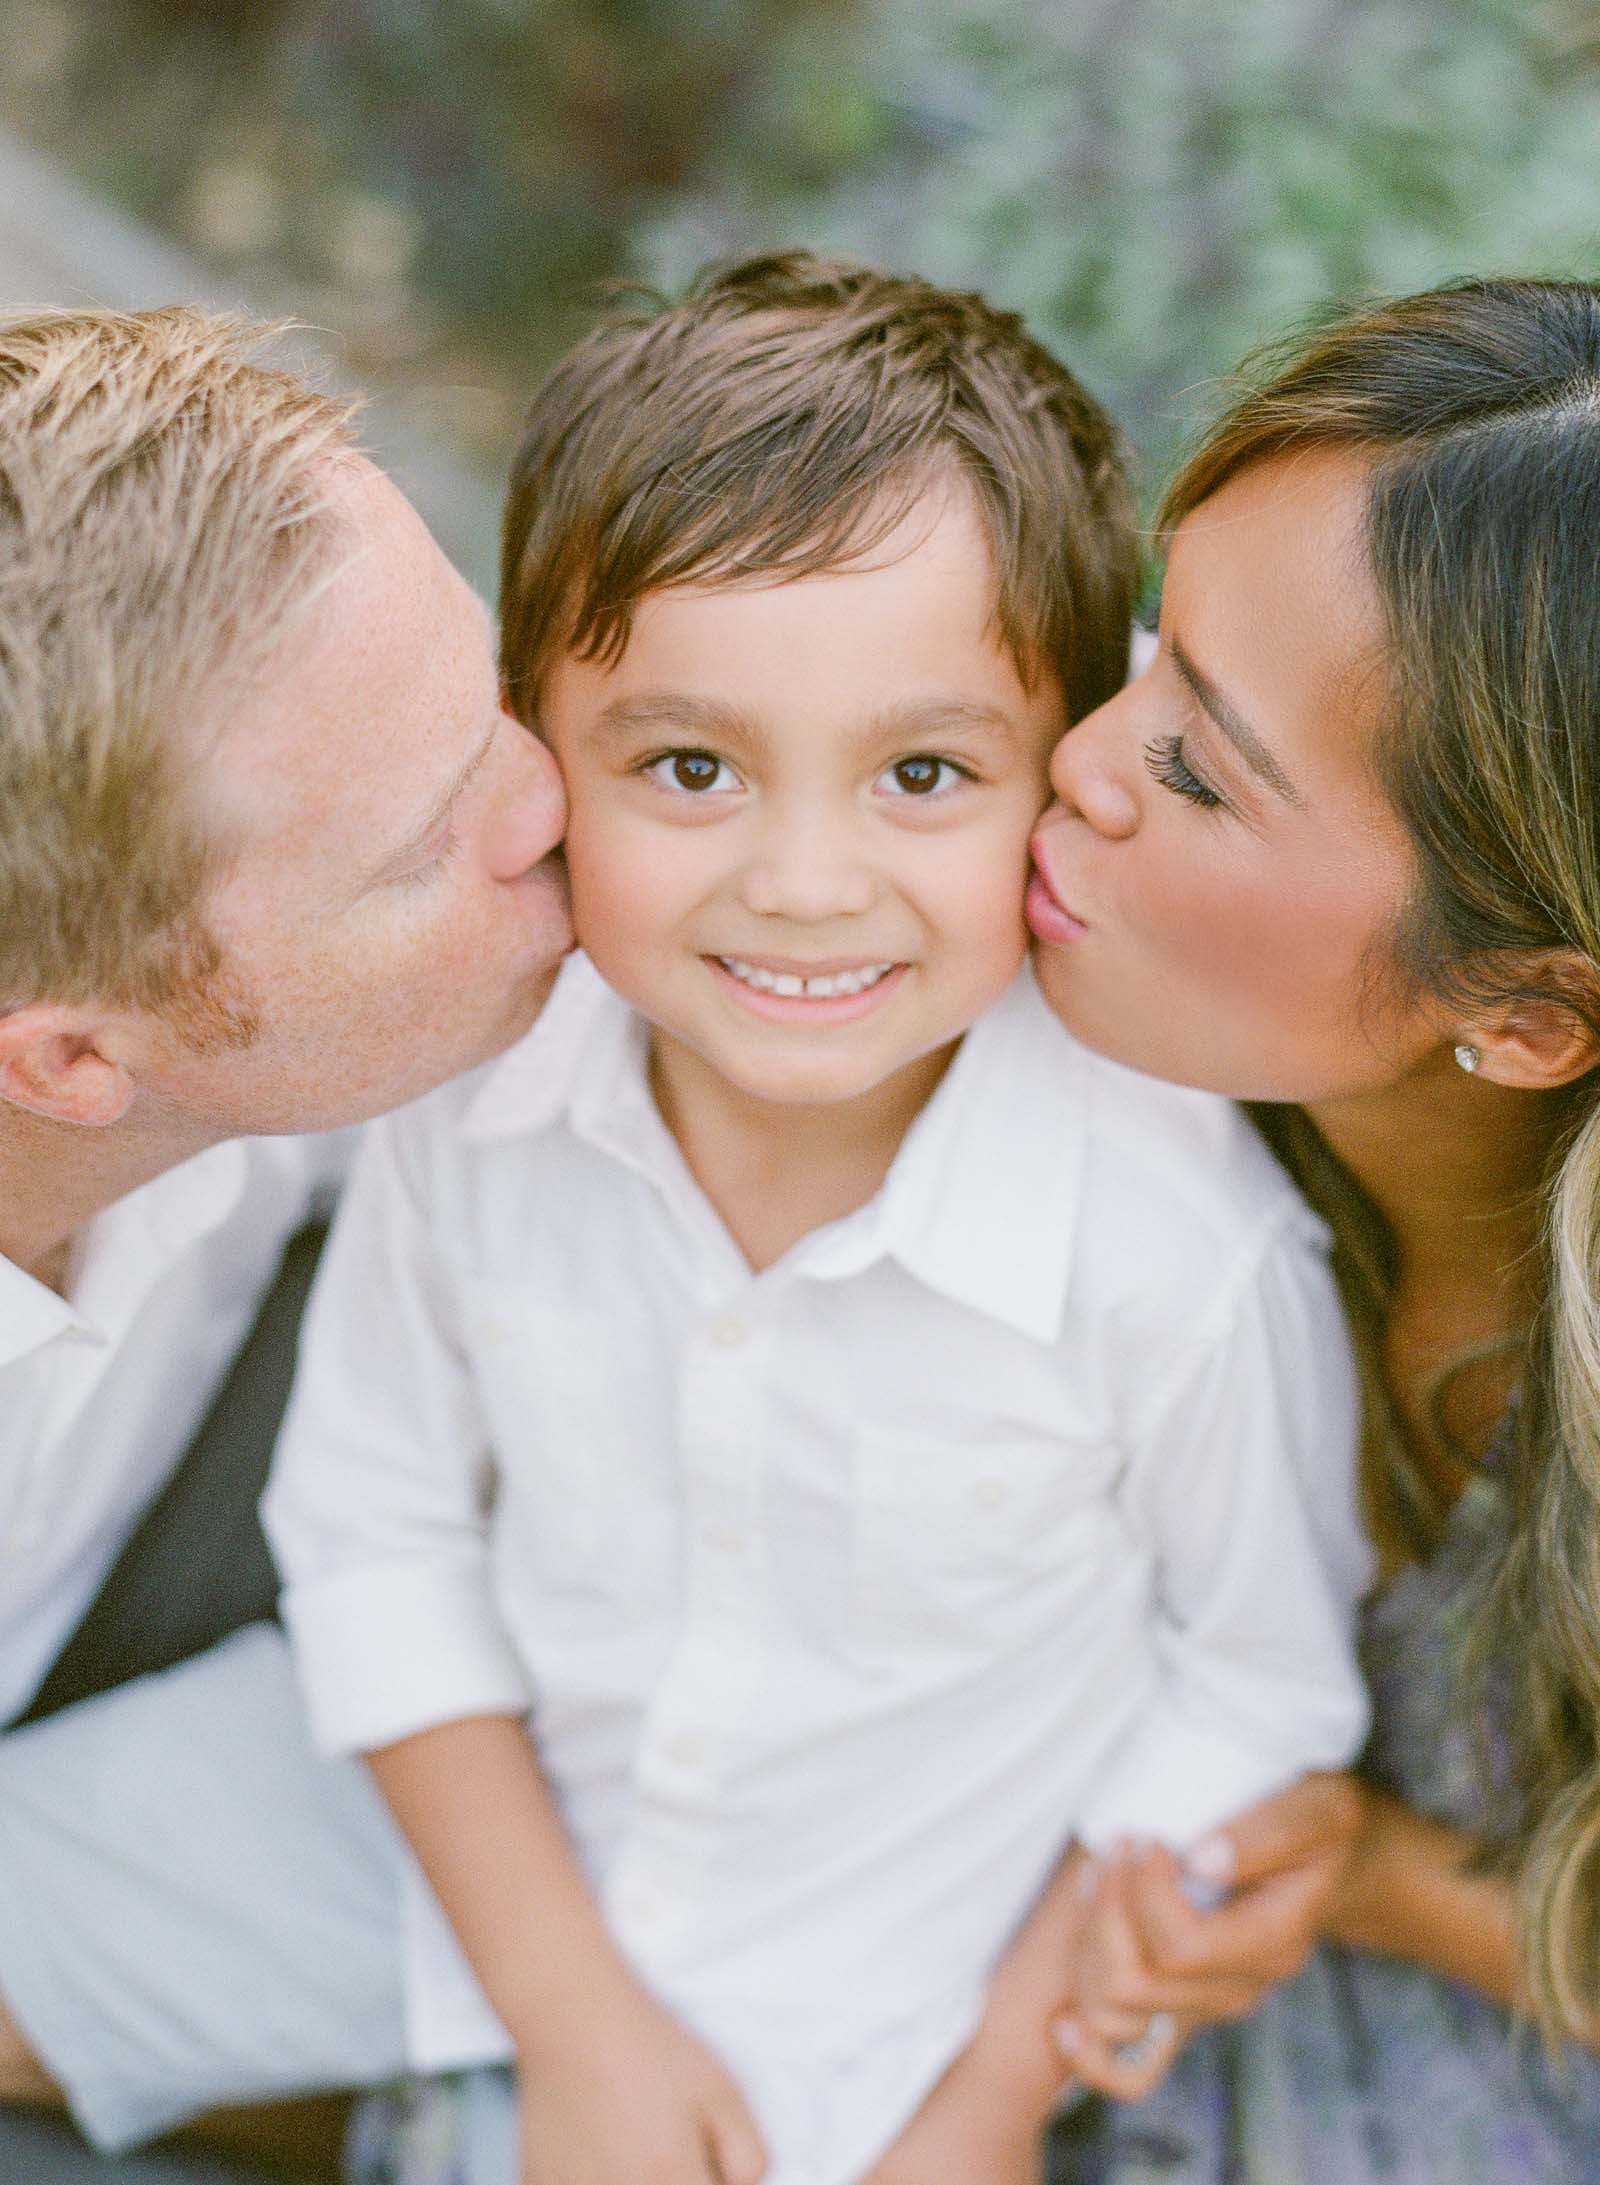 Mom and Dad kissing son - Light and airy family photography - San Francisco Bay Area Family Photography on Film - Family on Film - California Family Session - Mom and Dad looking at Children - Kent Avenue Photography - www.kentavenuephotography.com